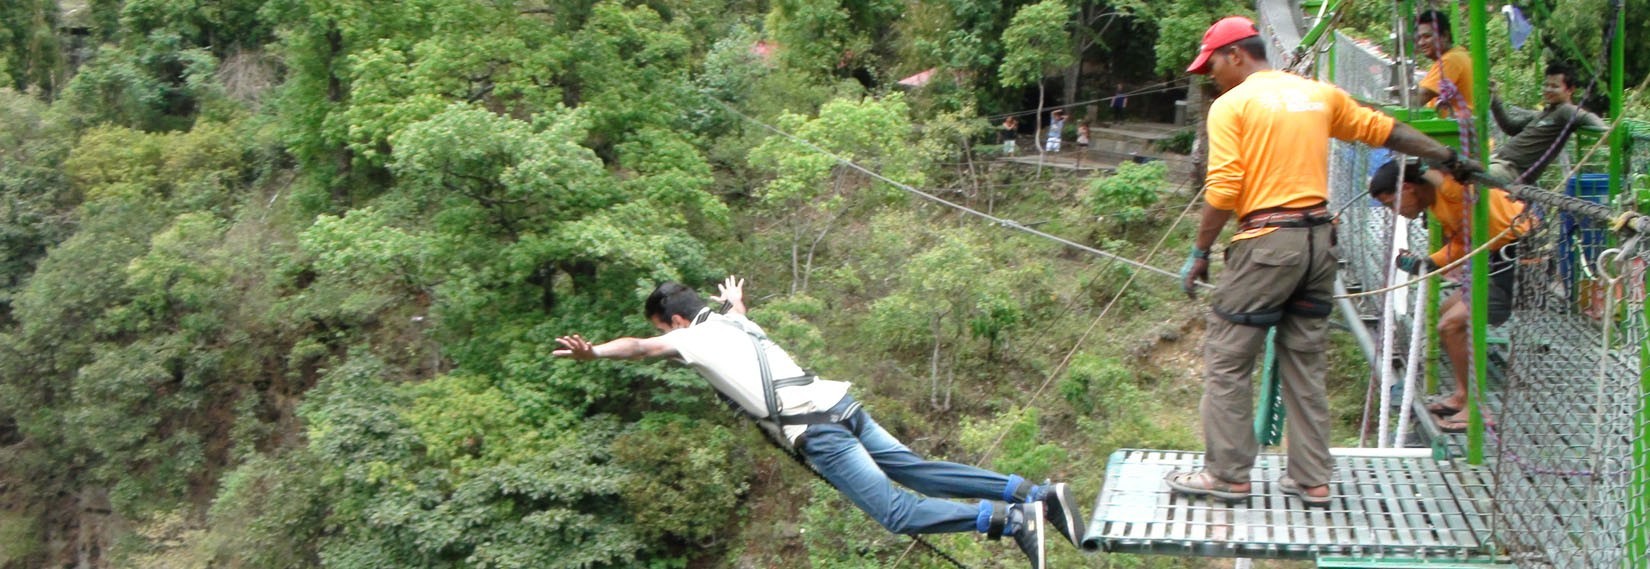 Bungee Jumping in Nepal 